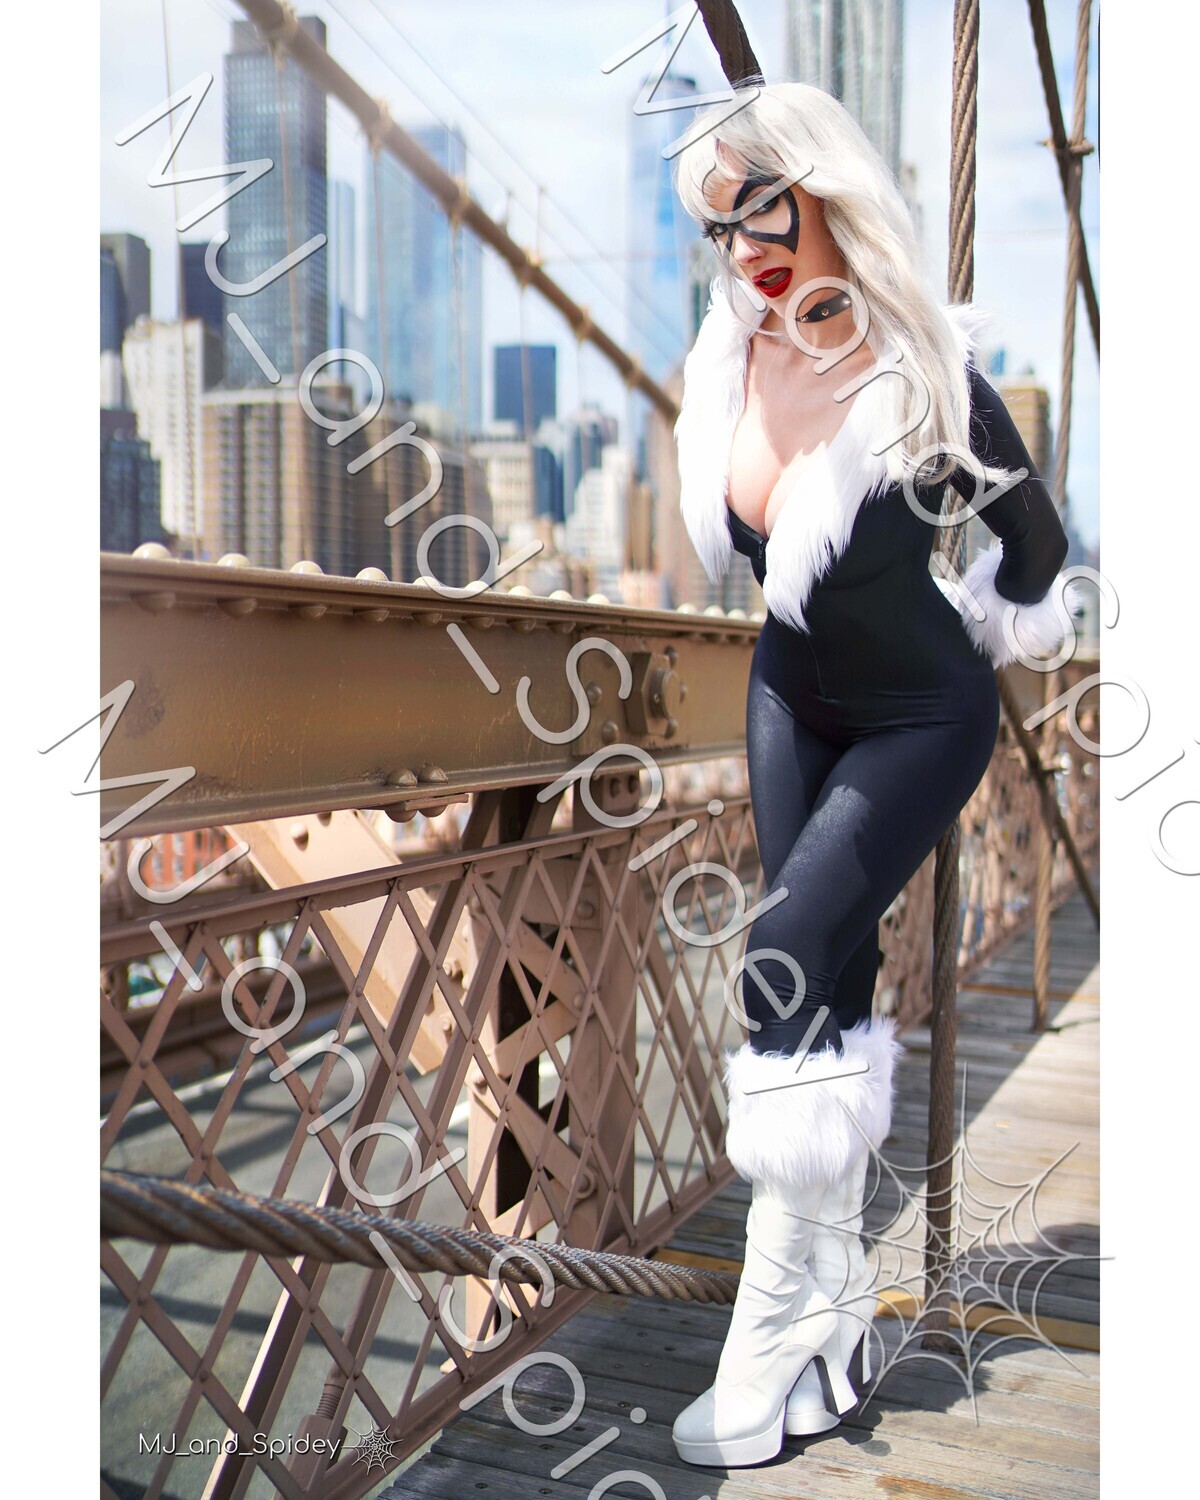 Marvel - Spider-Man - Black Cat - Classic 3 - Digital Cosplay Image (@MJ_and_Spidey, MJ and Spidey, Comics)